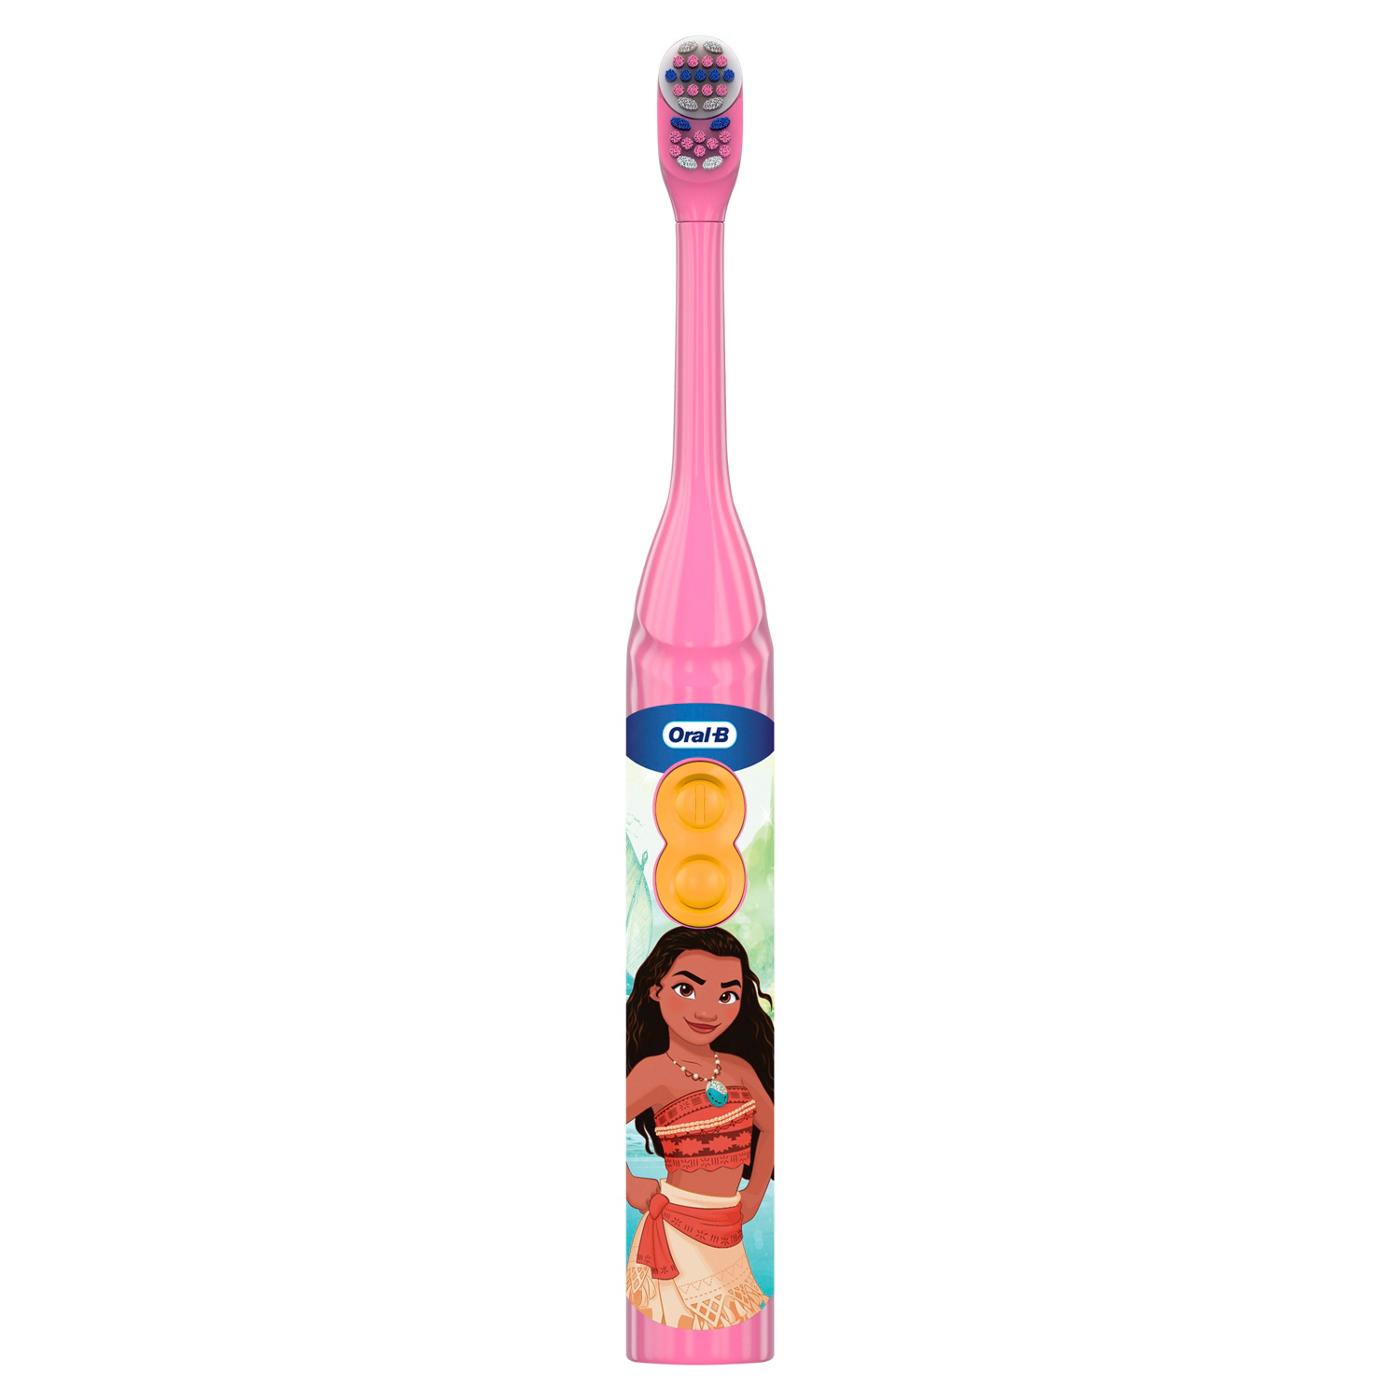 Oral-B Kids Disney Princess Characters Battery Power Toothbrush - Soft; image 8 of 9